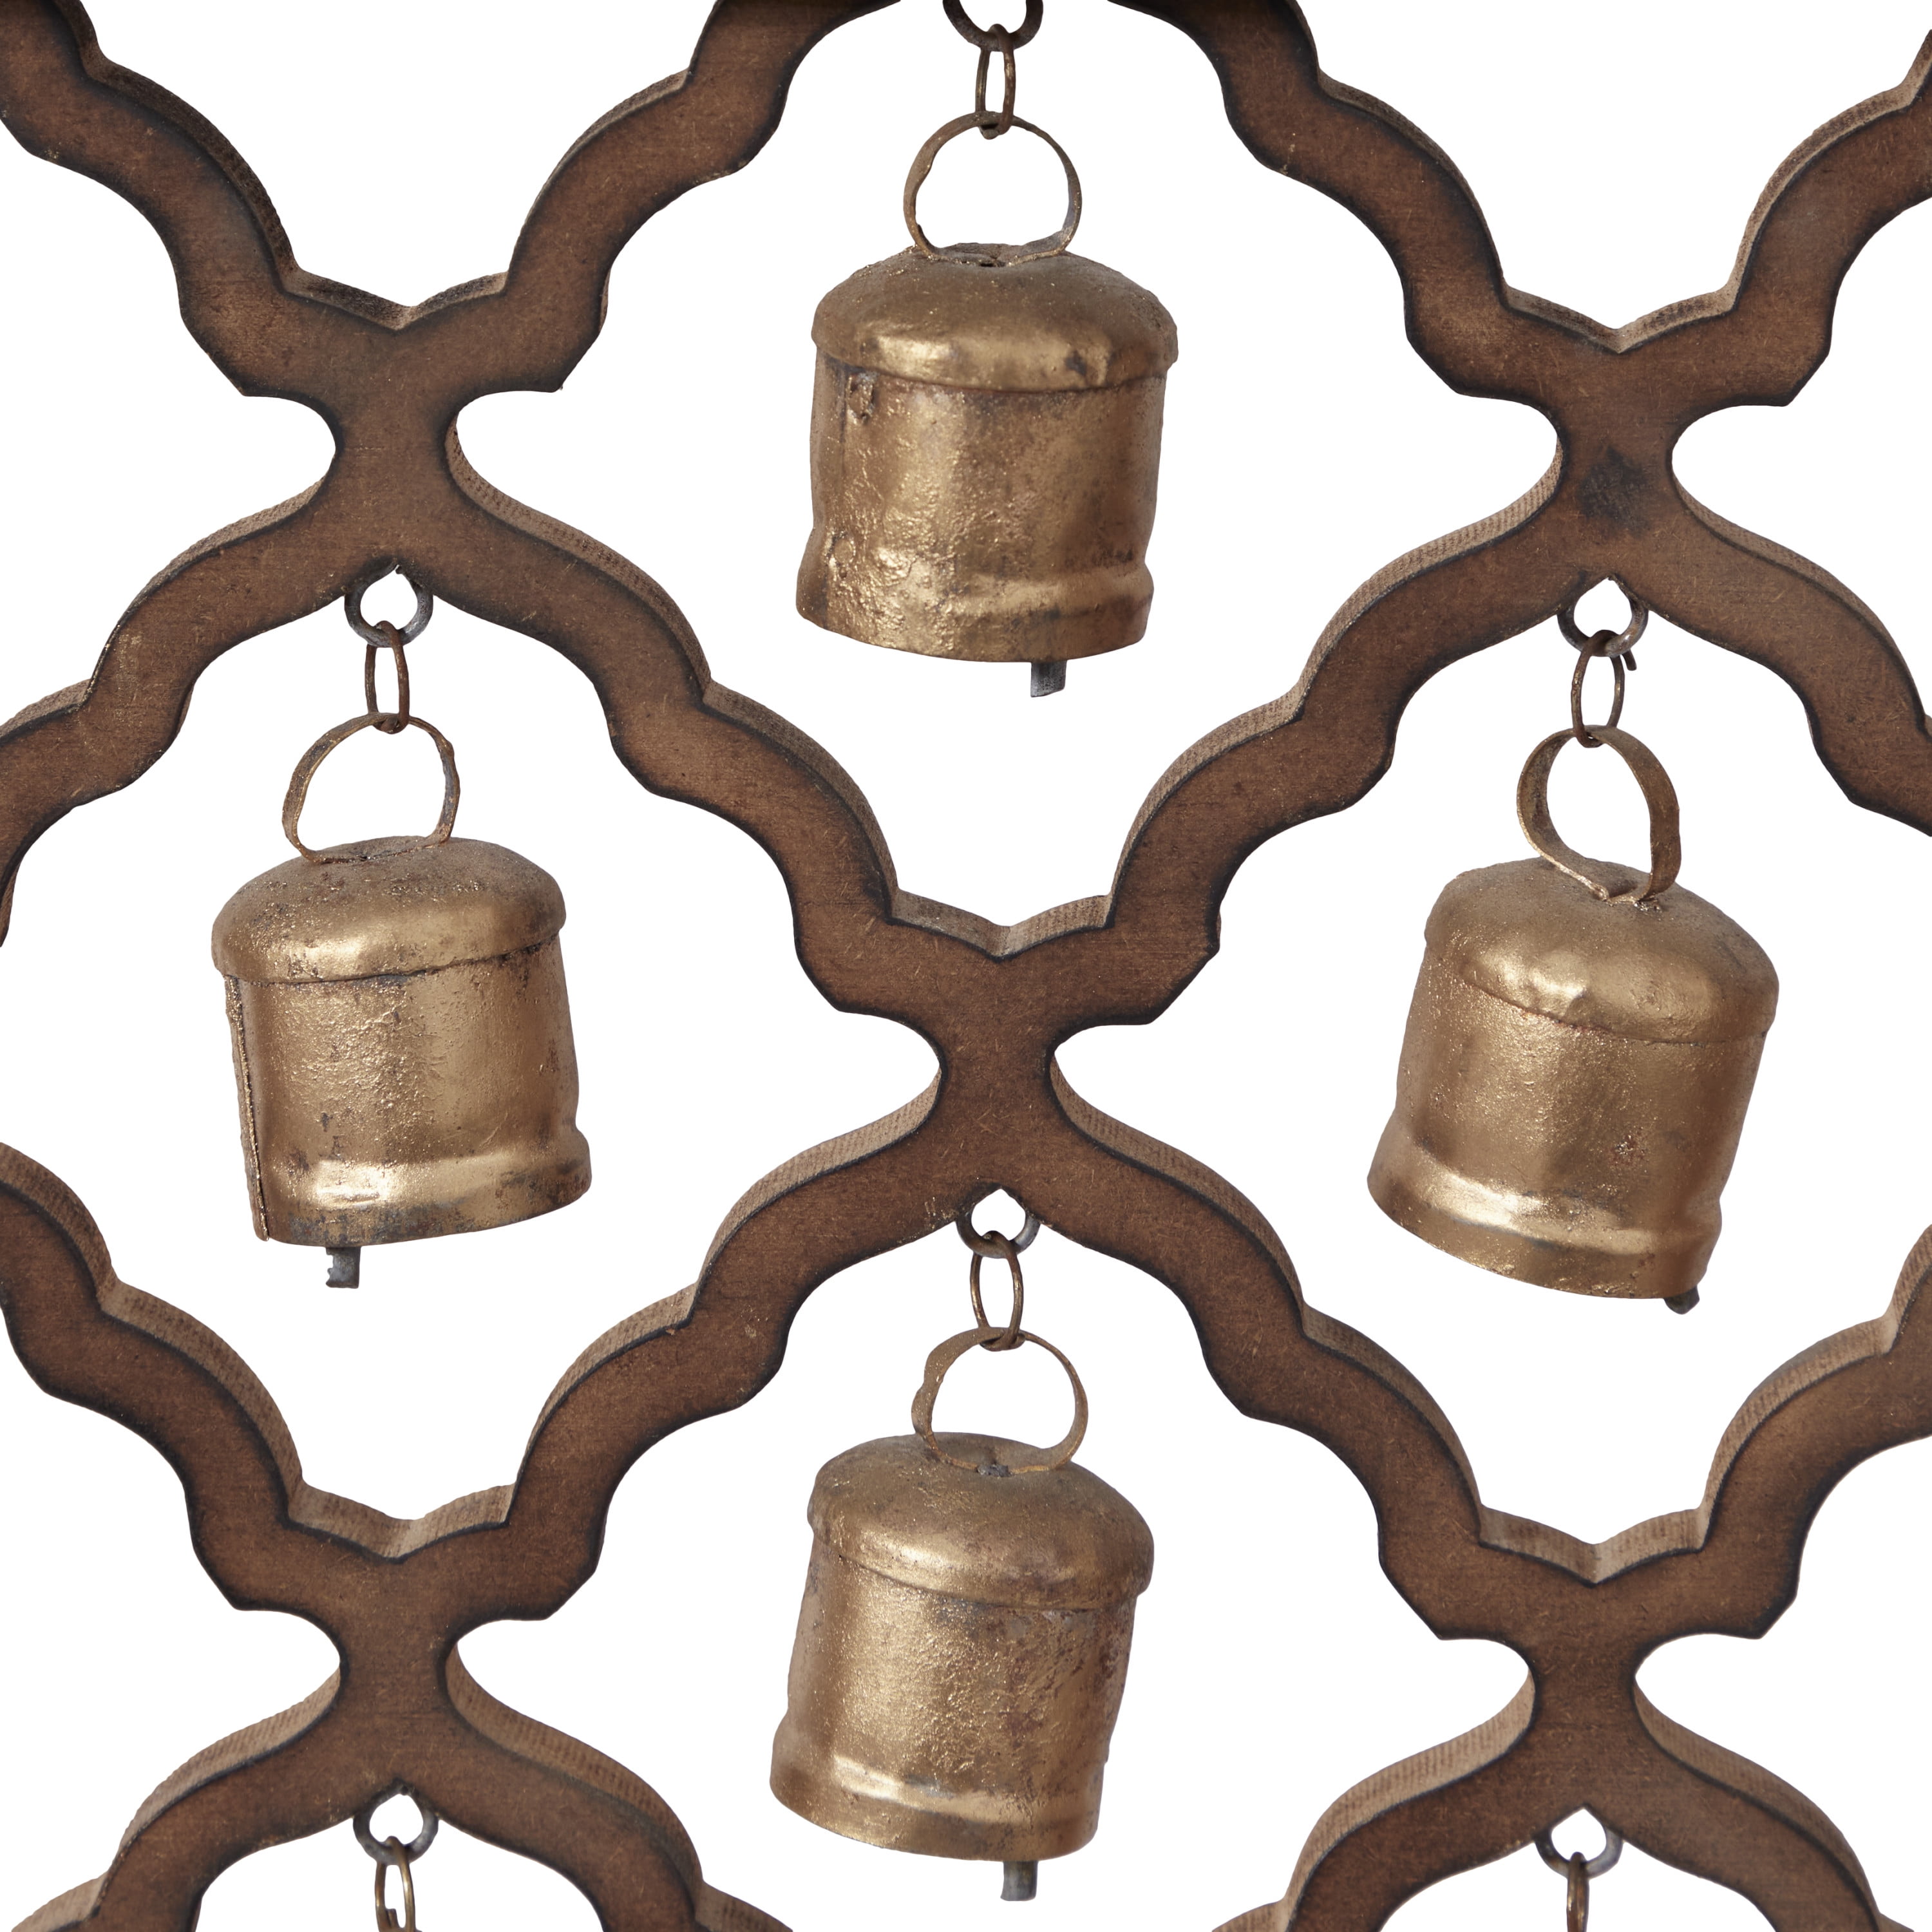 Where to Find Studio McGee's Vintage Hanging Bells for a Fraction